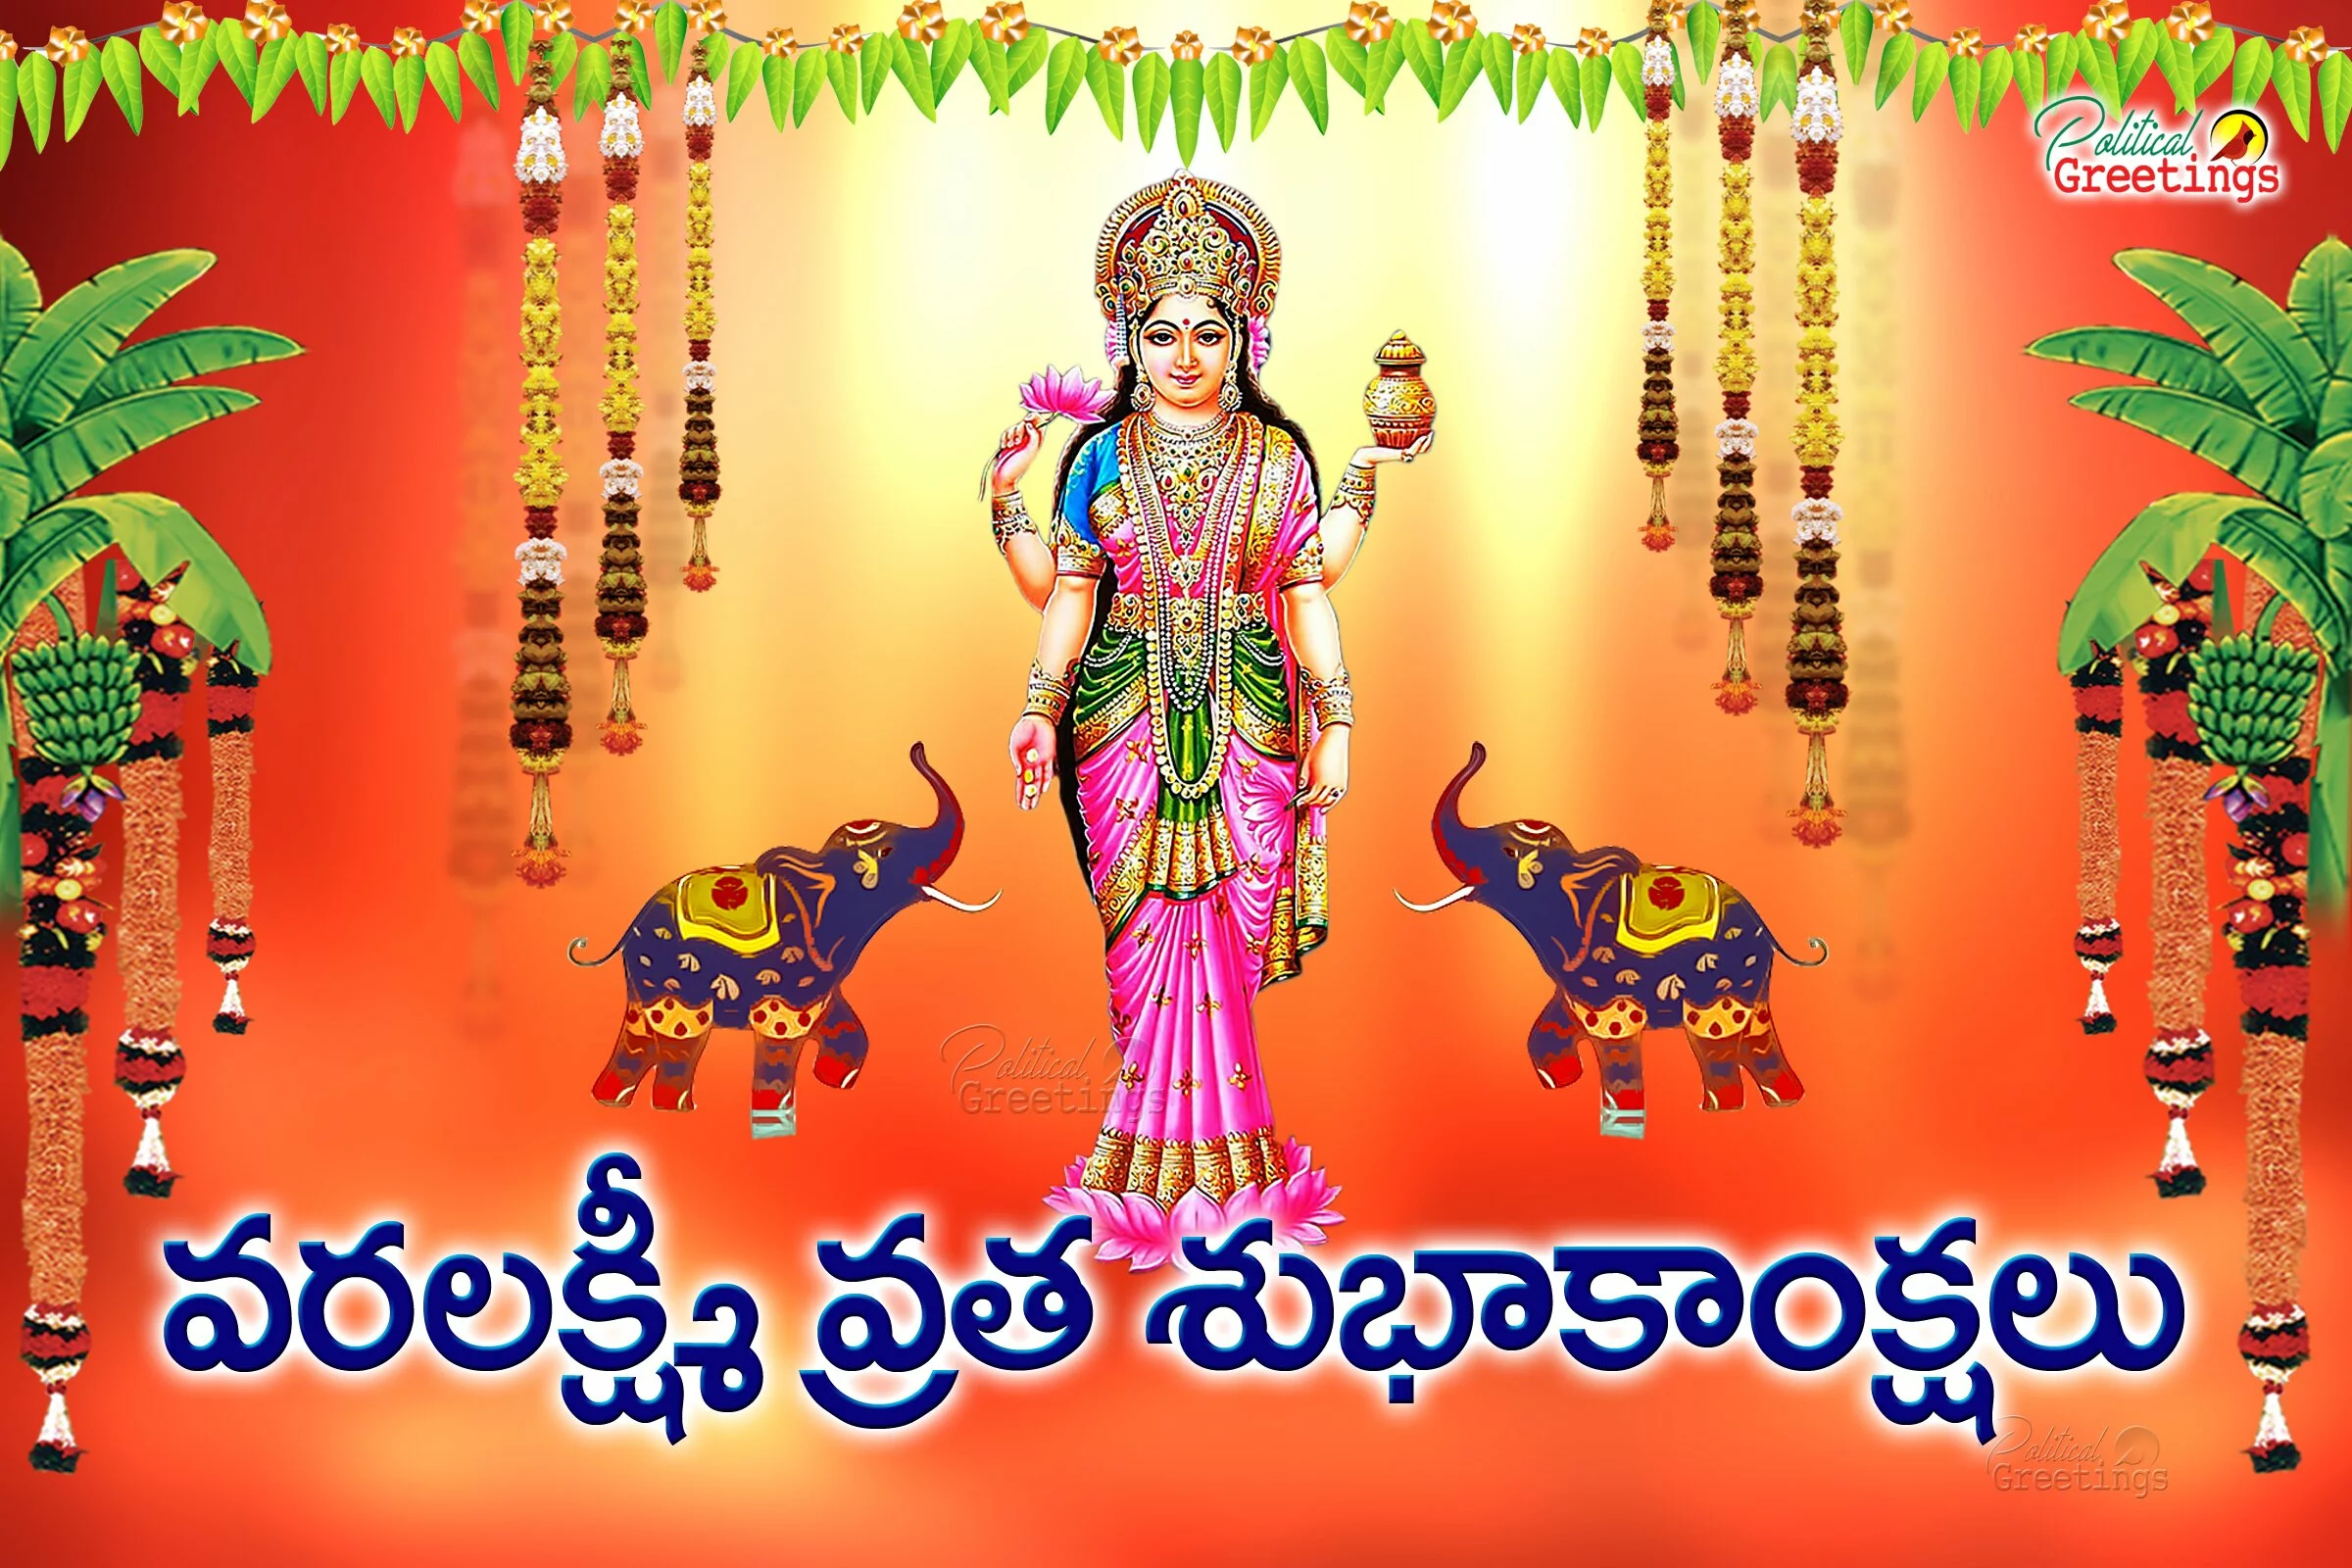 Varalakshmi vratam wishes quotes and greetings with Goddess Lakshmi HD Wallpapers